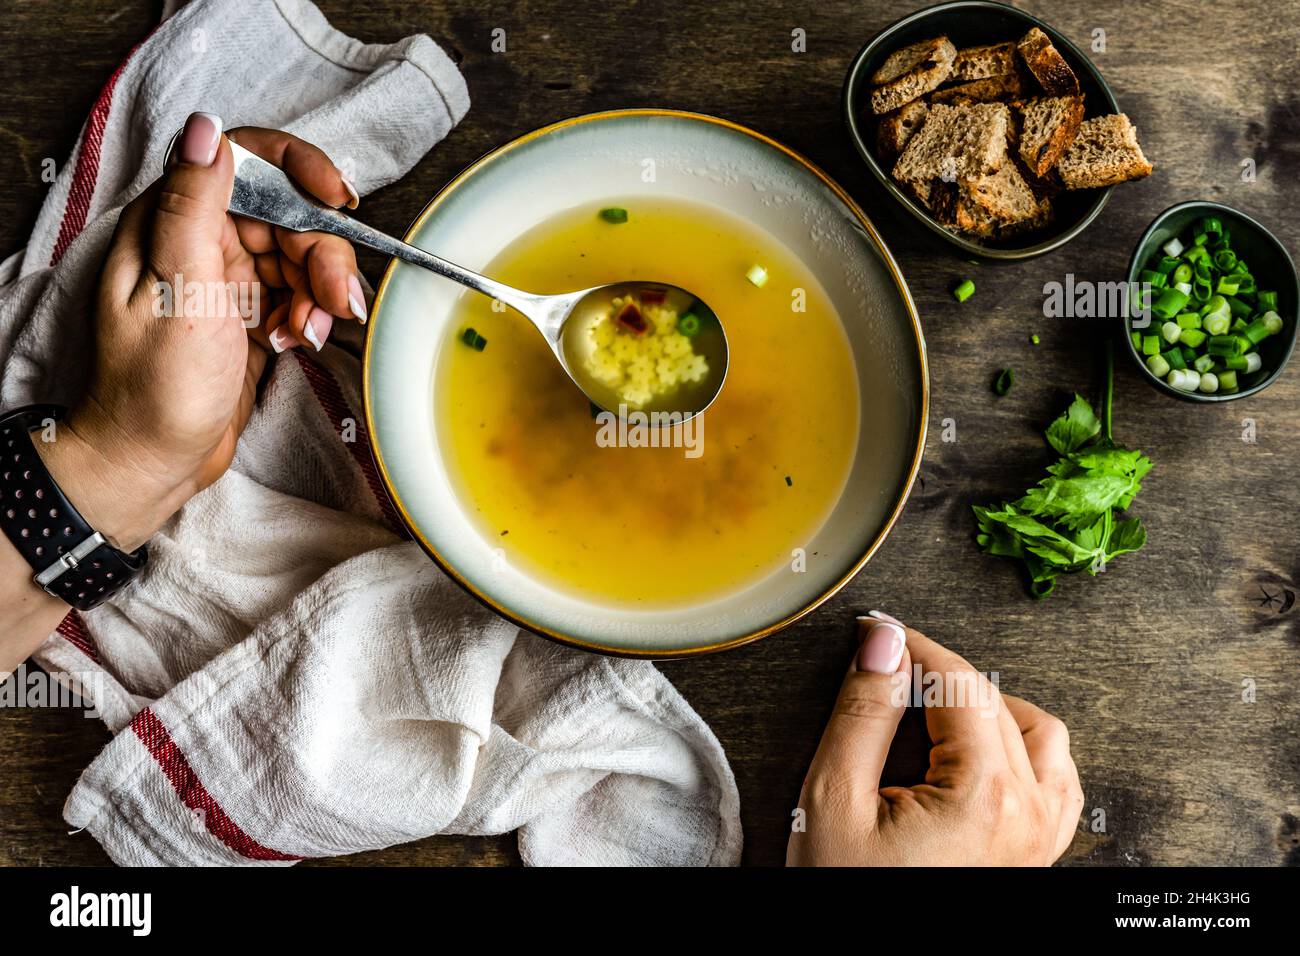 Woman eating a bowl of healthy chicken broth with pasta, croutons, parsley and spring onions Stock Photo